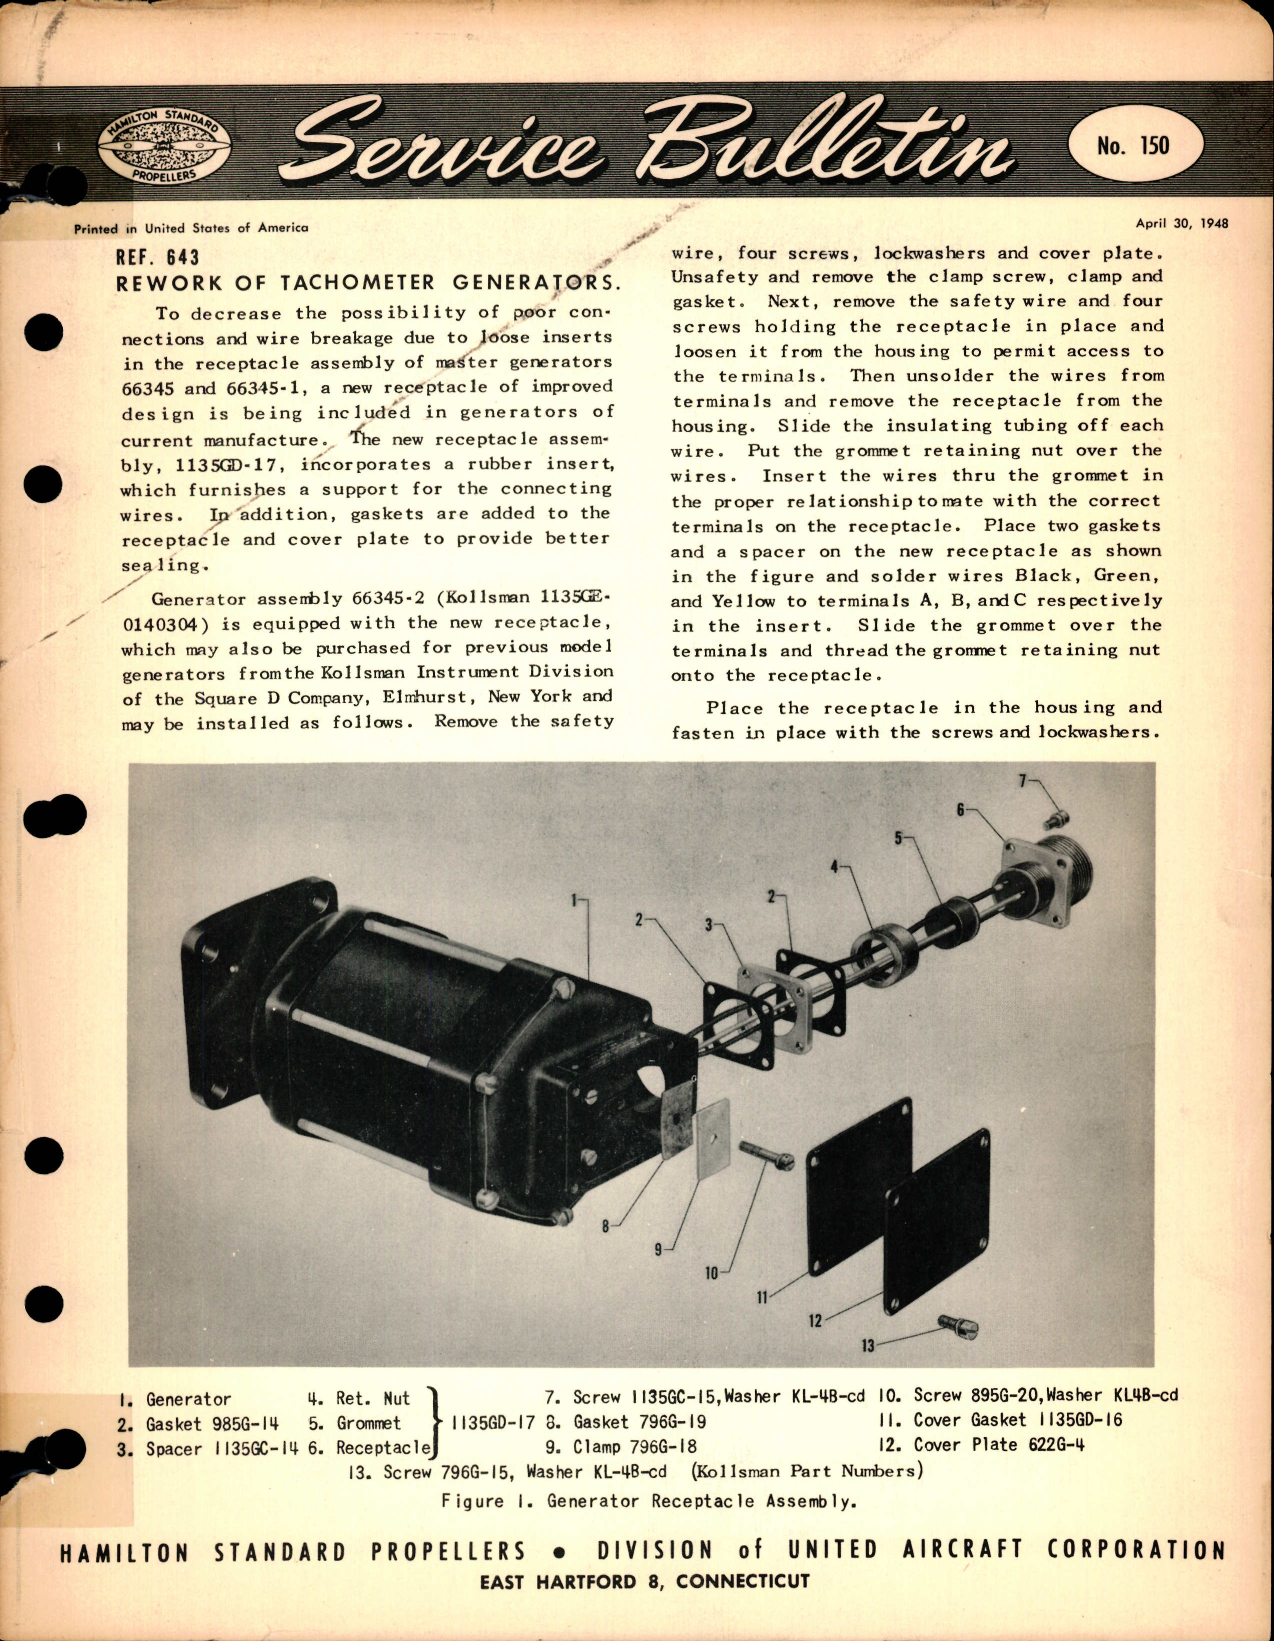 Sample page 1 from AirCorps Library document: Rework of Tachometer Generators, Ref 643